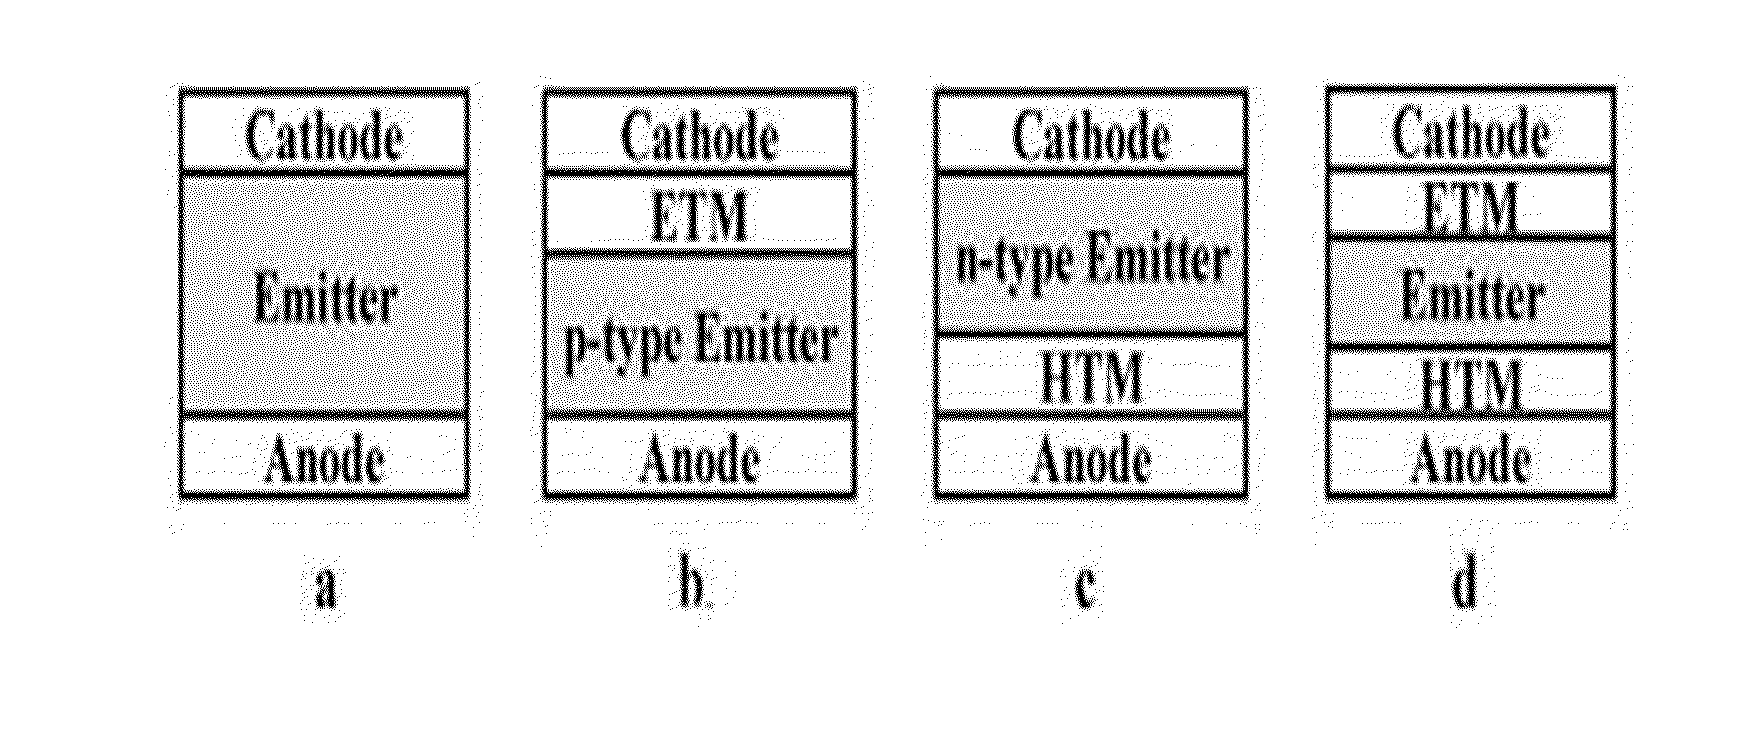 Charge-transporting Molecular Glass Mixtures, Luminescent Molecular Glass Mixtures, or Combinations Thereof for Organic Light Emitting Diodes and other Organic Electronics and Photonics Applications